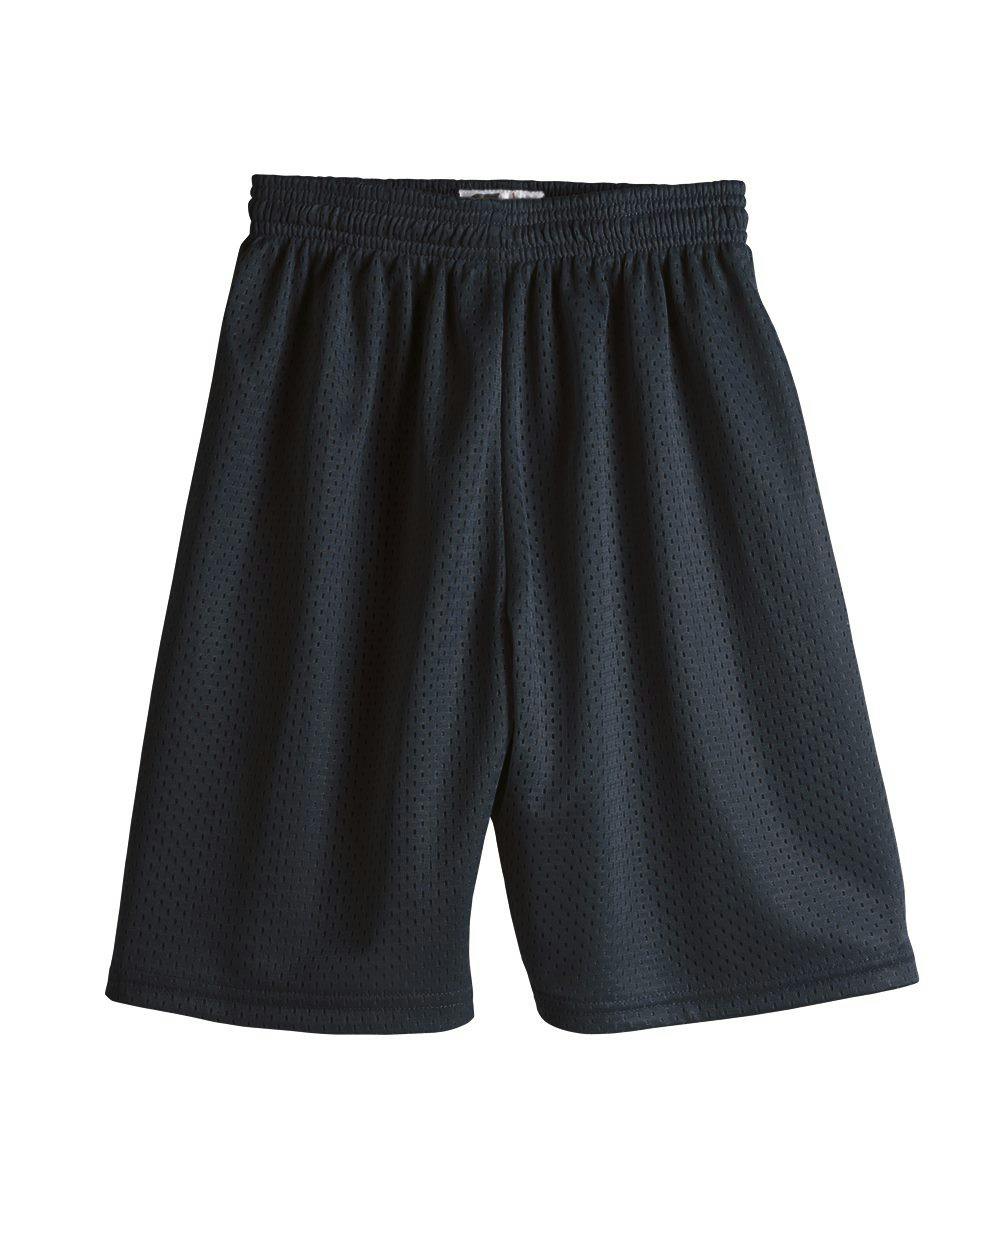 Image for Youth Mesh Shorts - 5209